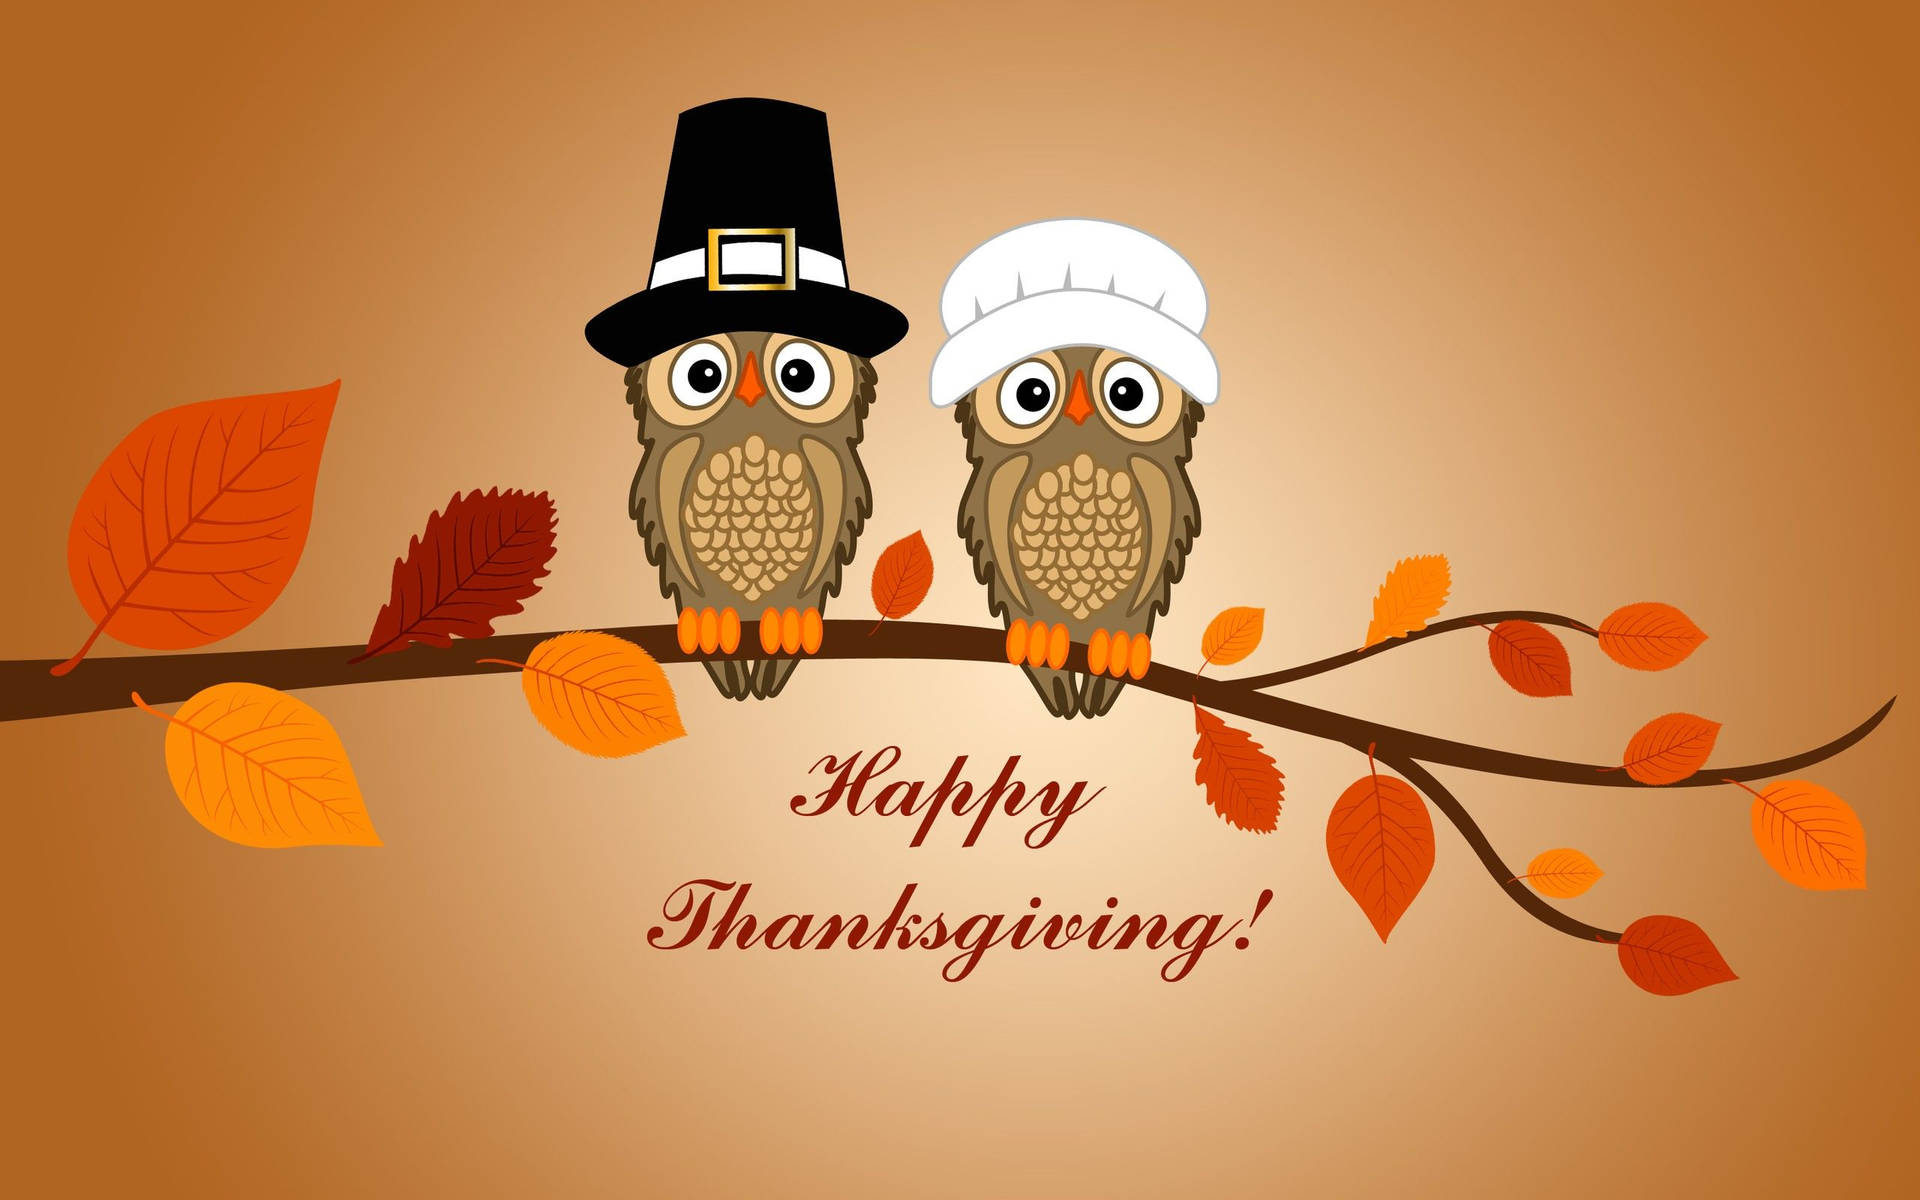 200+] Thanksgiving Wallpapers